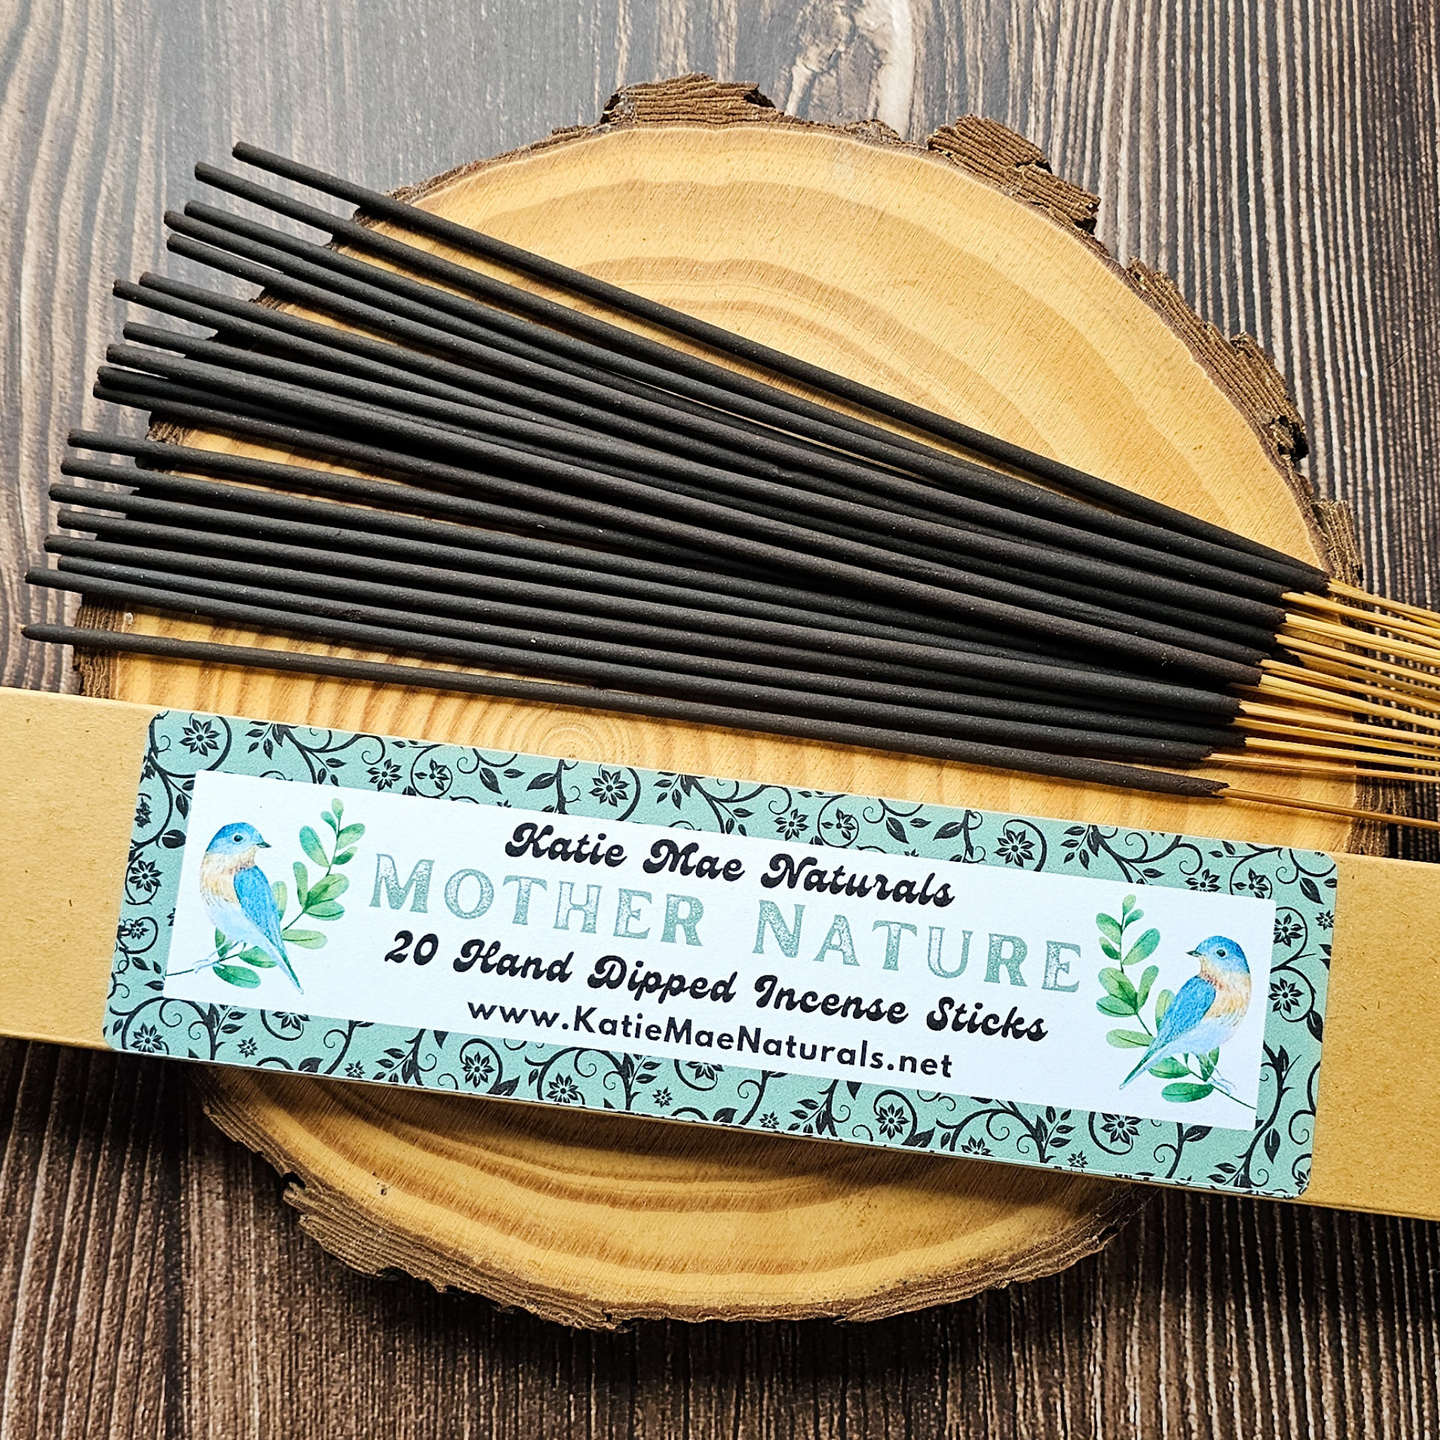 Mother nature hand dipped incense sticks